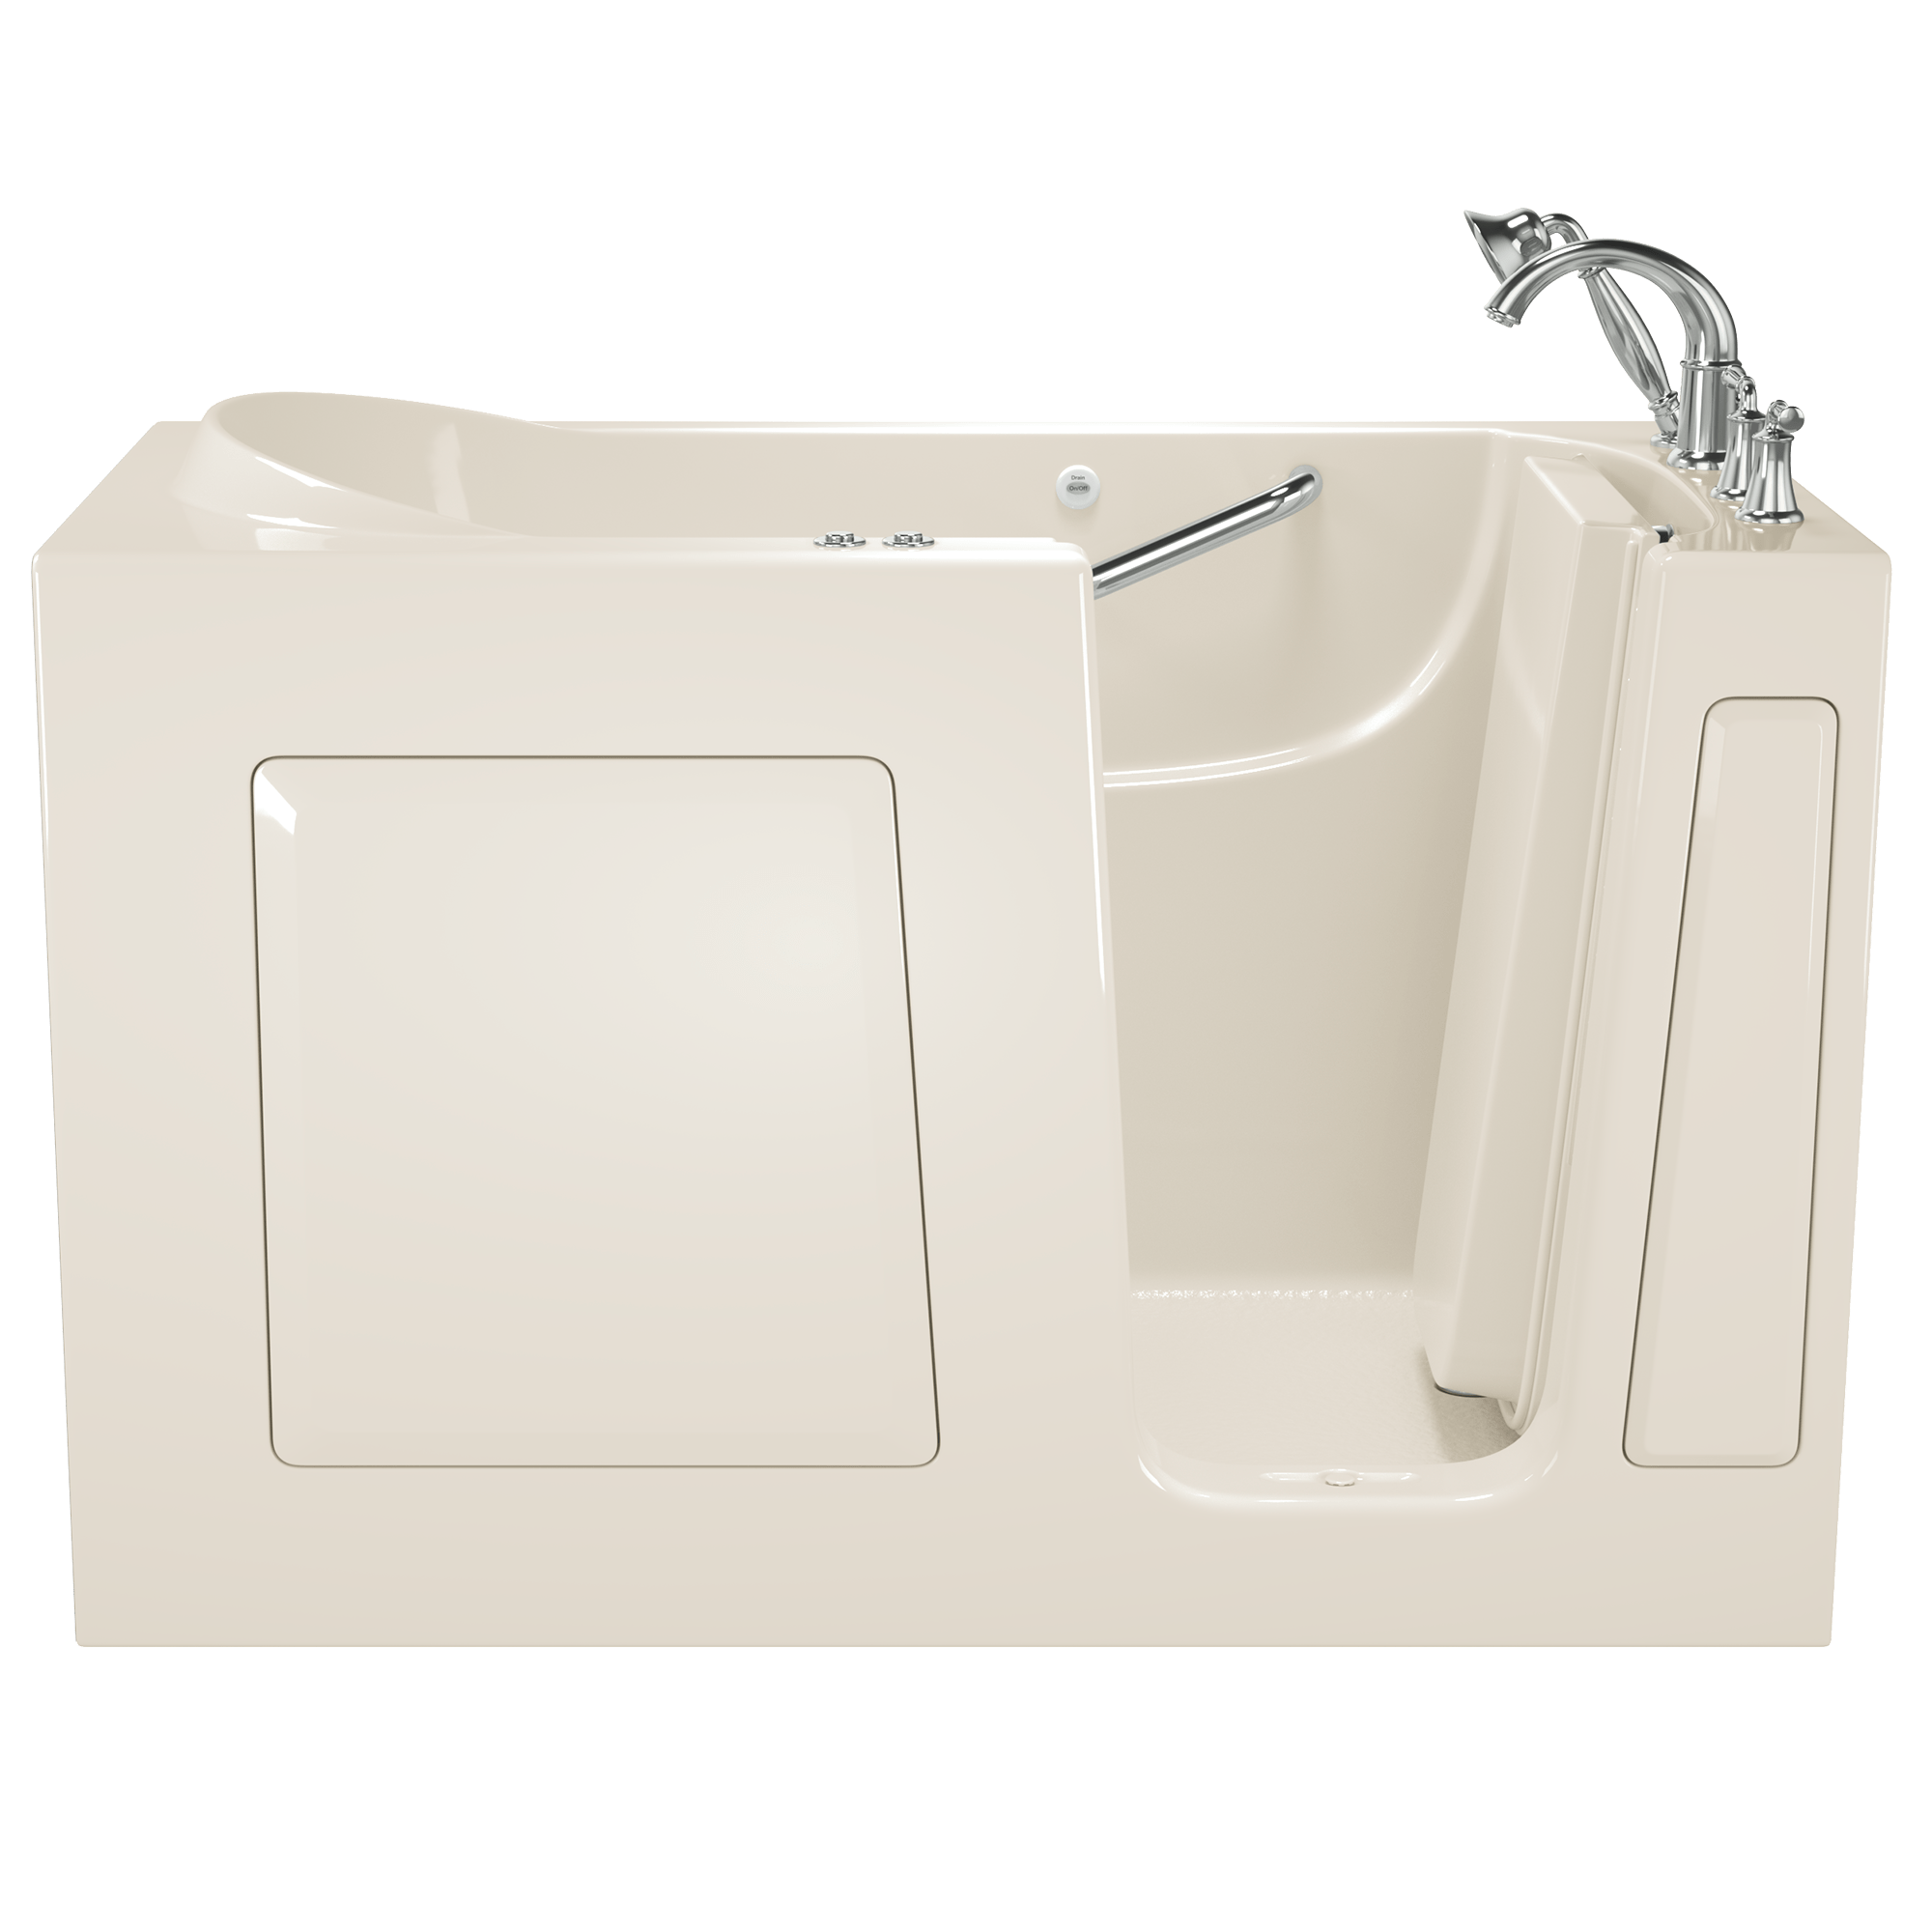 Gelcoat Value Series 60x30 Inch Walk In Bathtub with Combination Whirlpool and Air Spa System   Right Hand Door and Drain WIB LINEN